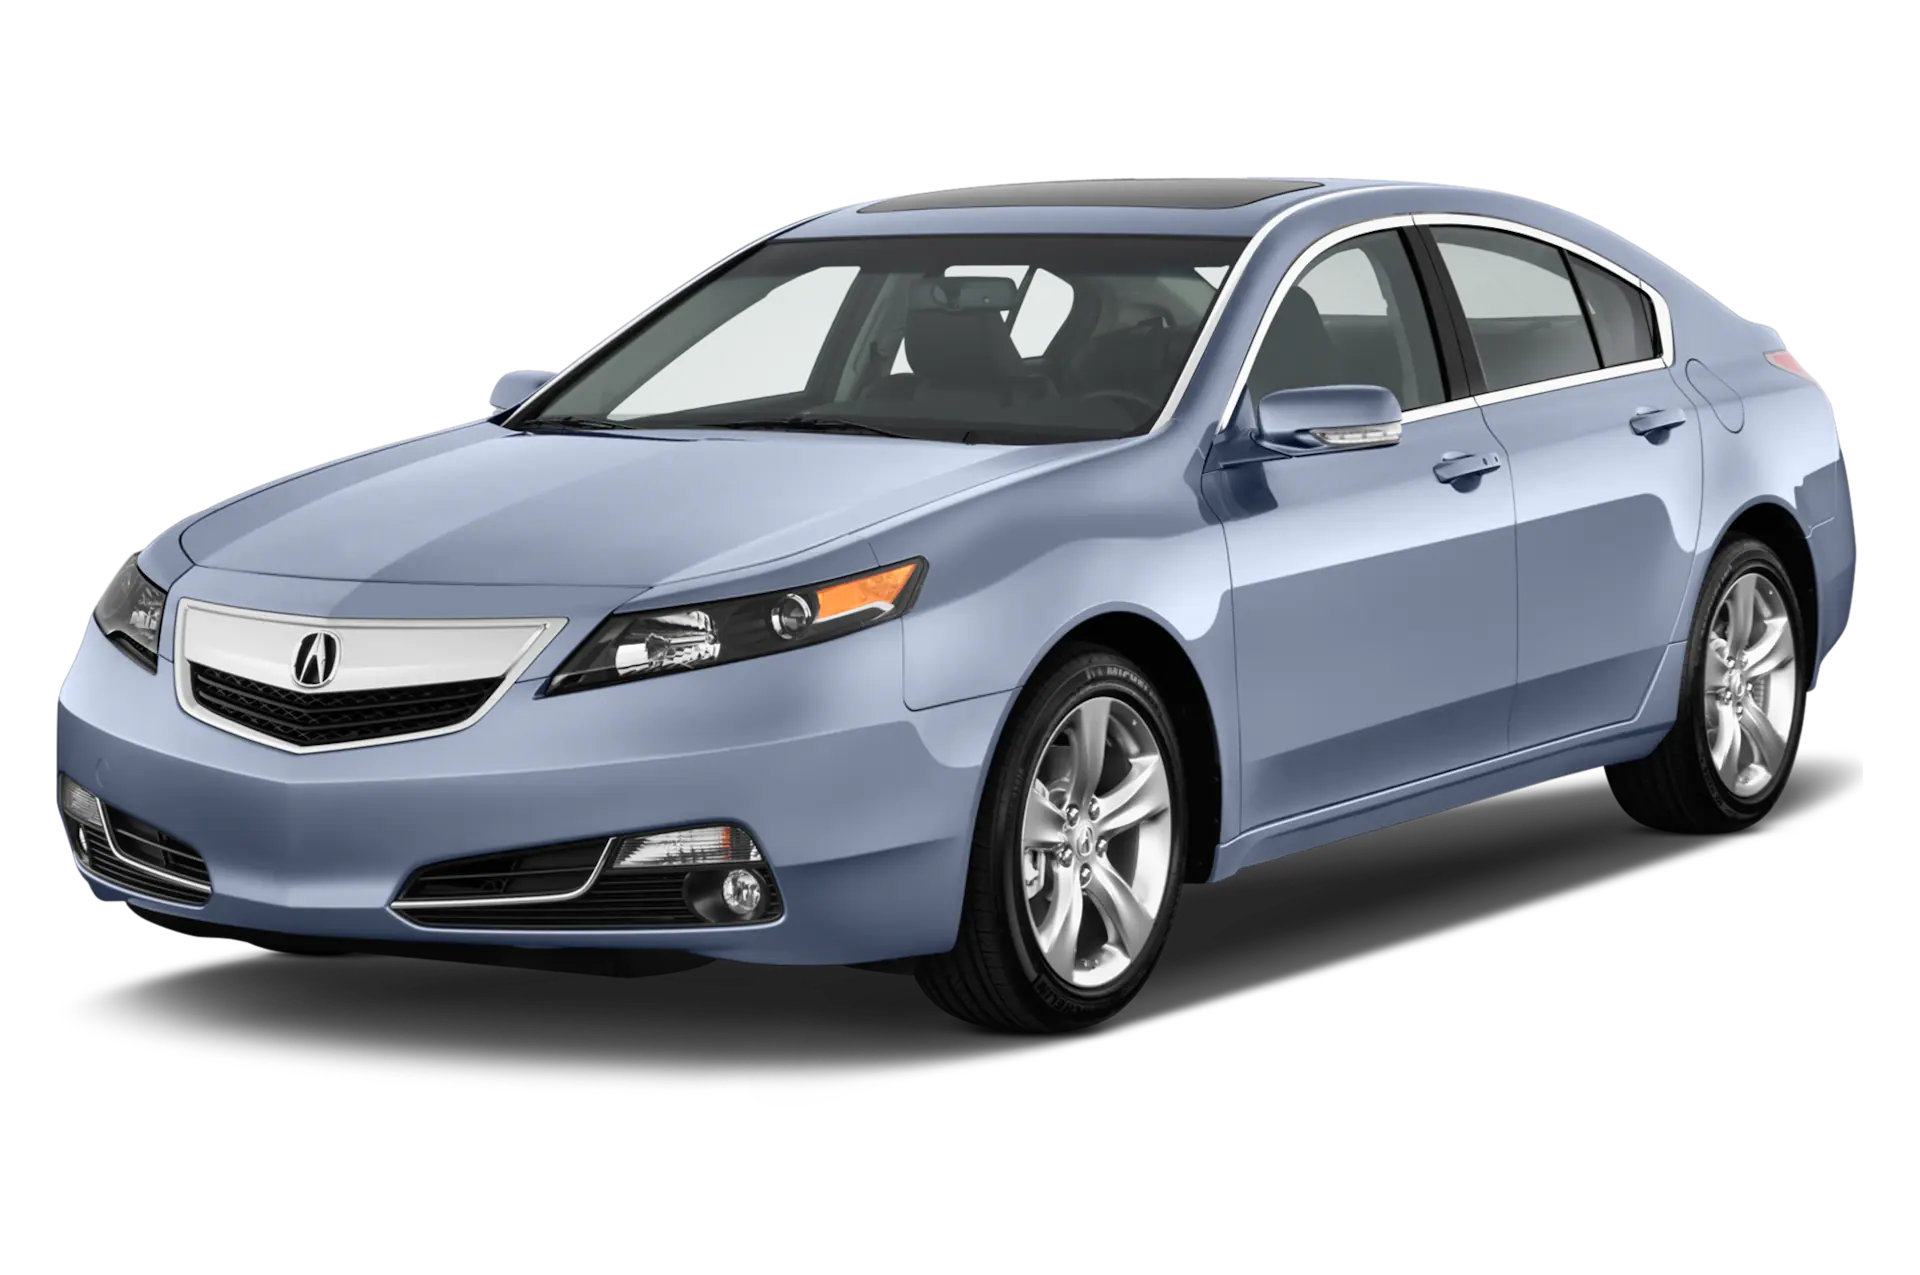 2012 Acura Tl oem parts and accessories on sale